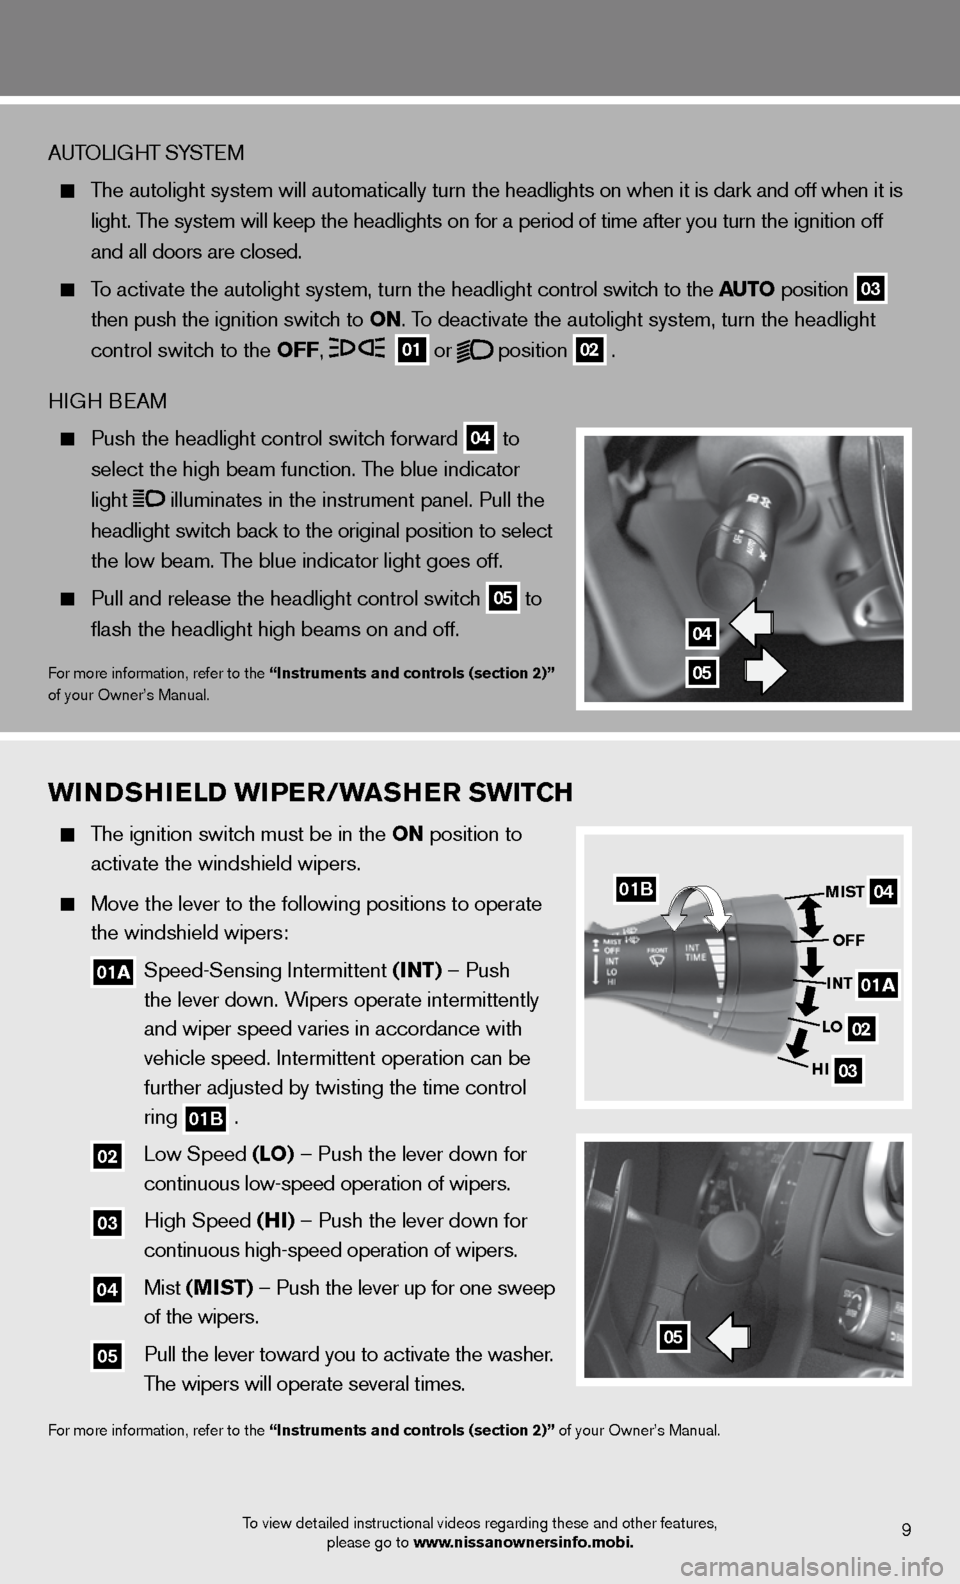 NISSAN GT-R 2013 R35 Quick Reference Guide wiNDShielD wiPer/waSher  Swi Tch
   The ignition switch must be in the oN position to 
    activate the windshield wipers.   
 
  Move the lever to the following positions to operate 
    the windshie